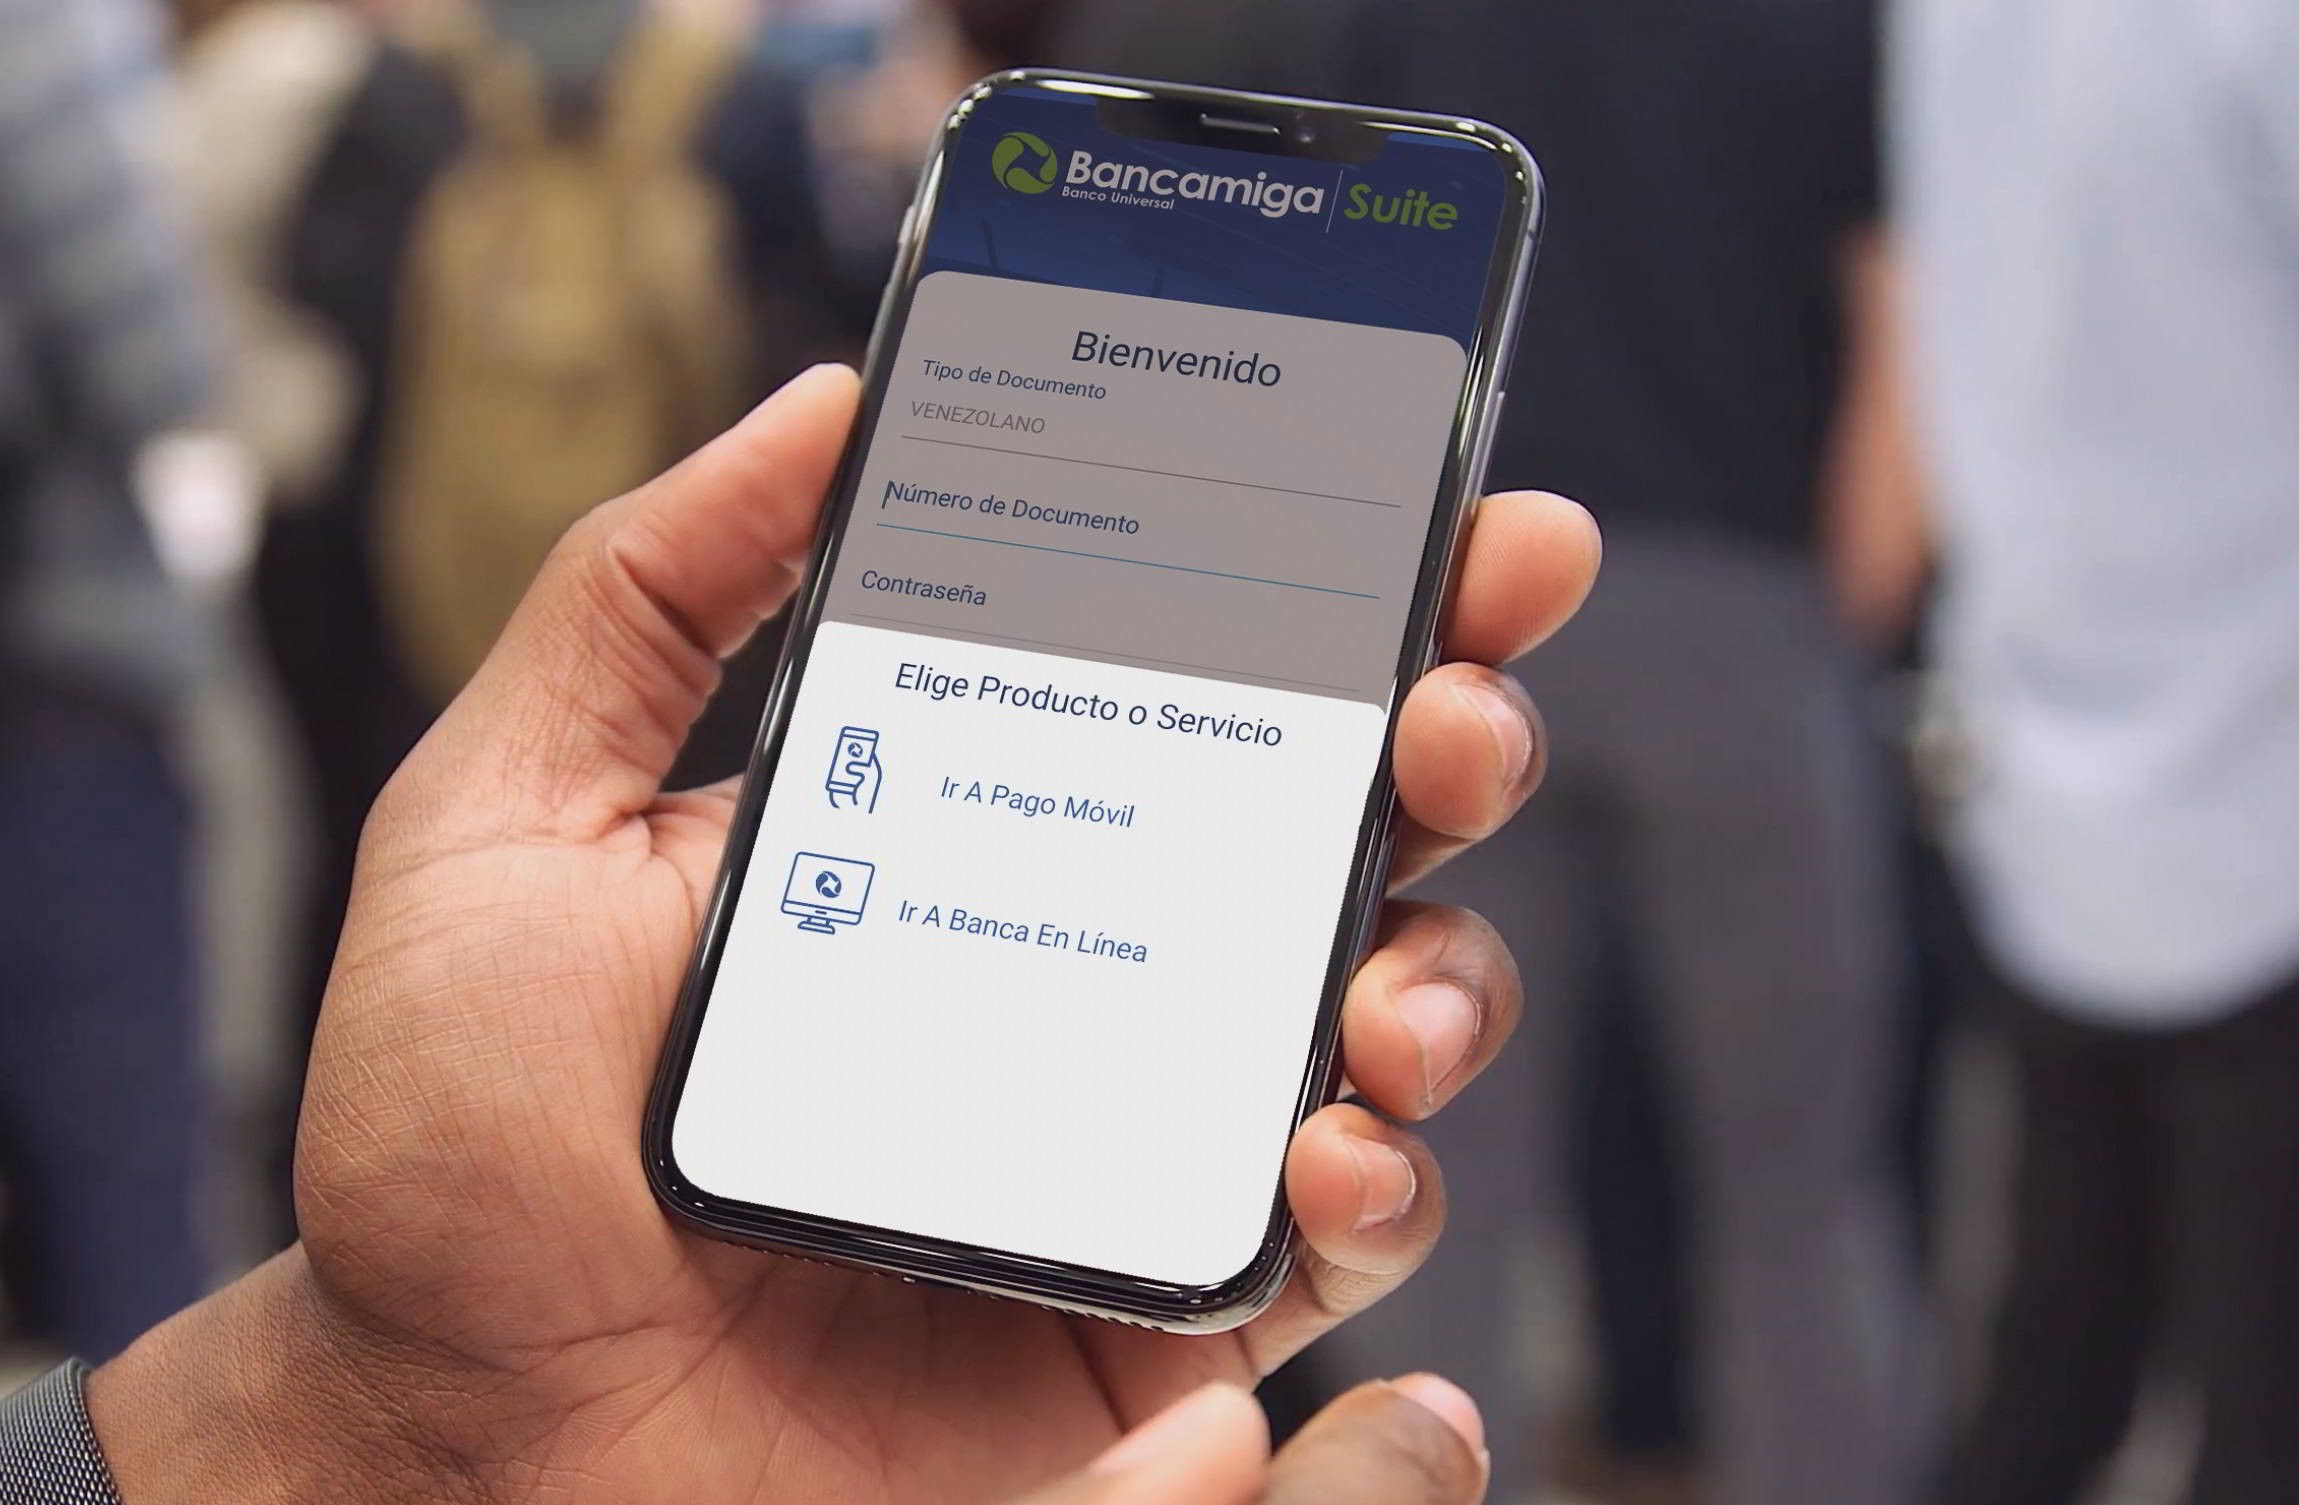 Bancamiga customers now have the most innovative, sophisticated and secure application of Venezuelan digital banking. The legal person is incorporated to mobile payment